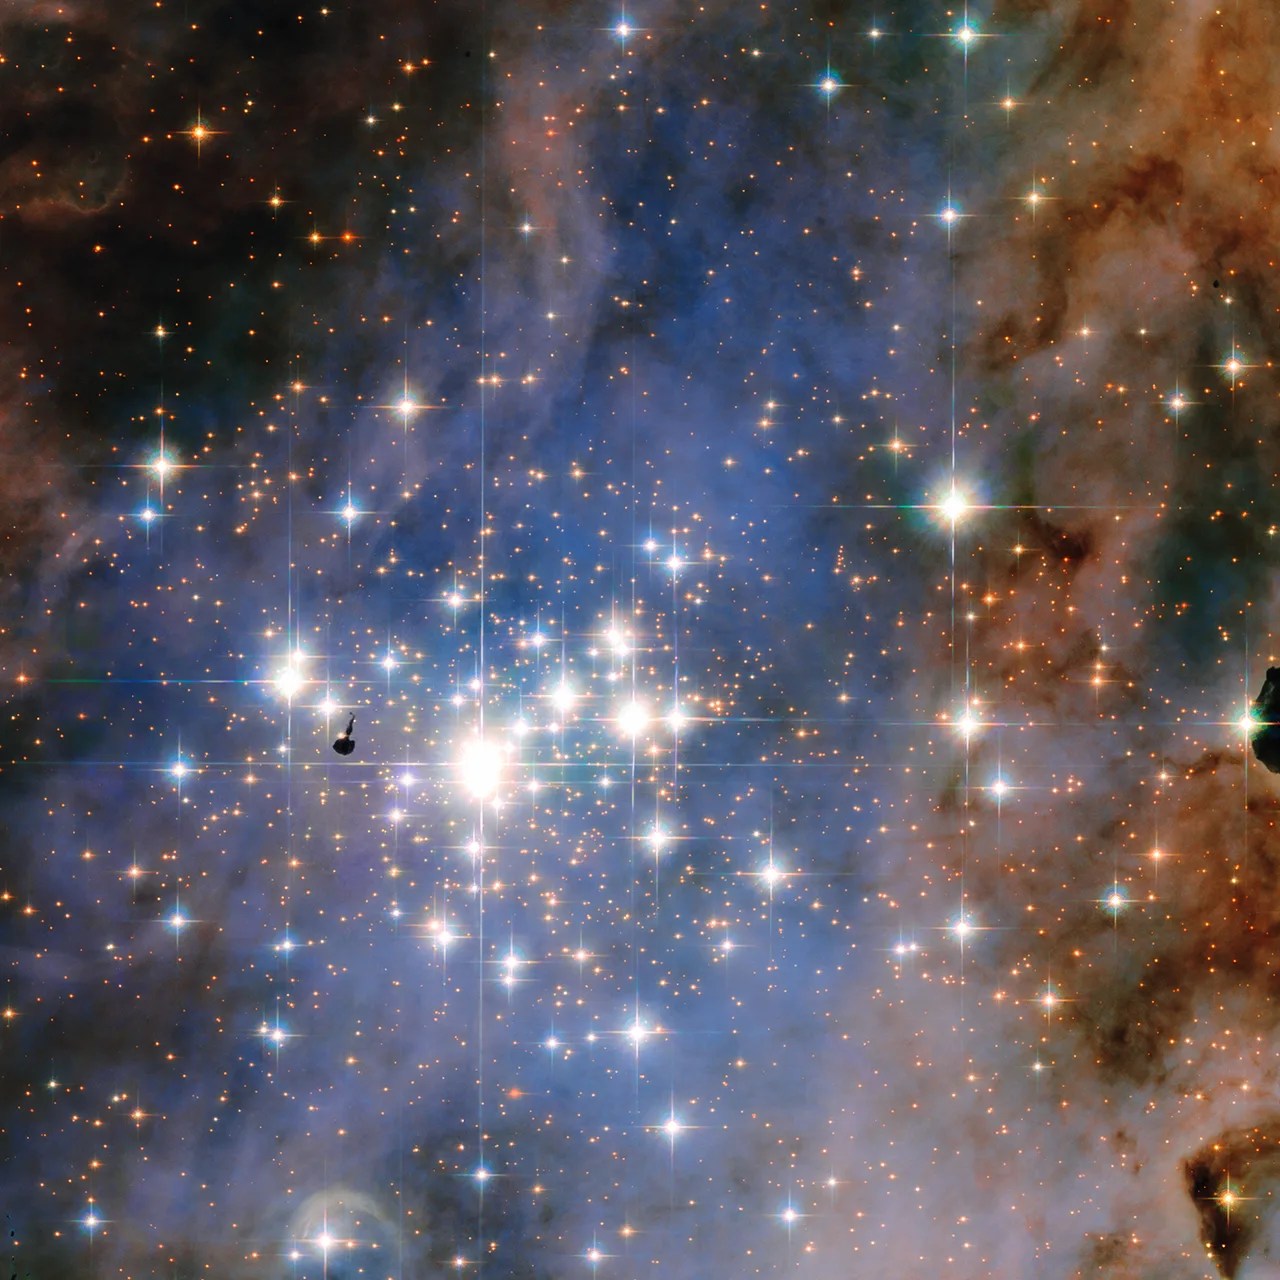 Bright-white stars fill the center of the image. They are backlit by a blue cloud of gas and dust. Right side of the image holds a rusty-red cloud with dark dust lanes.